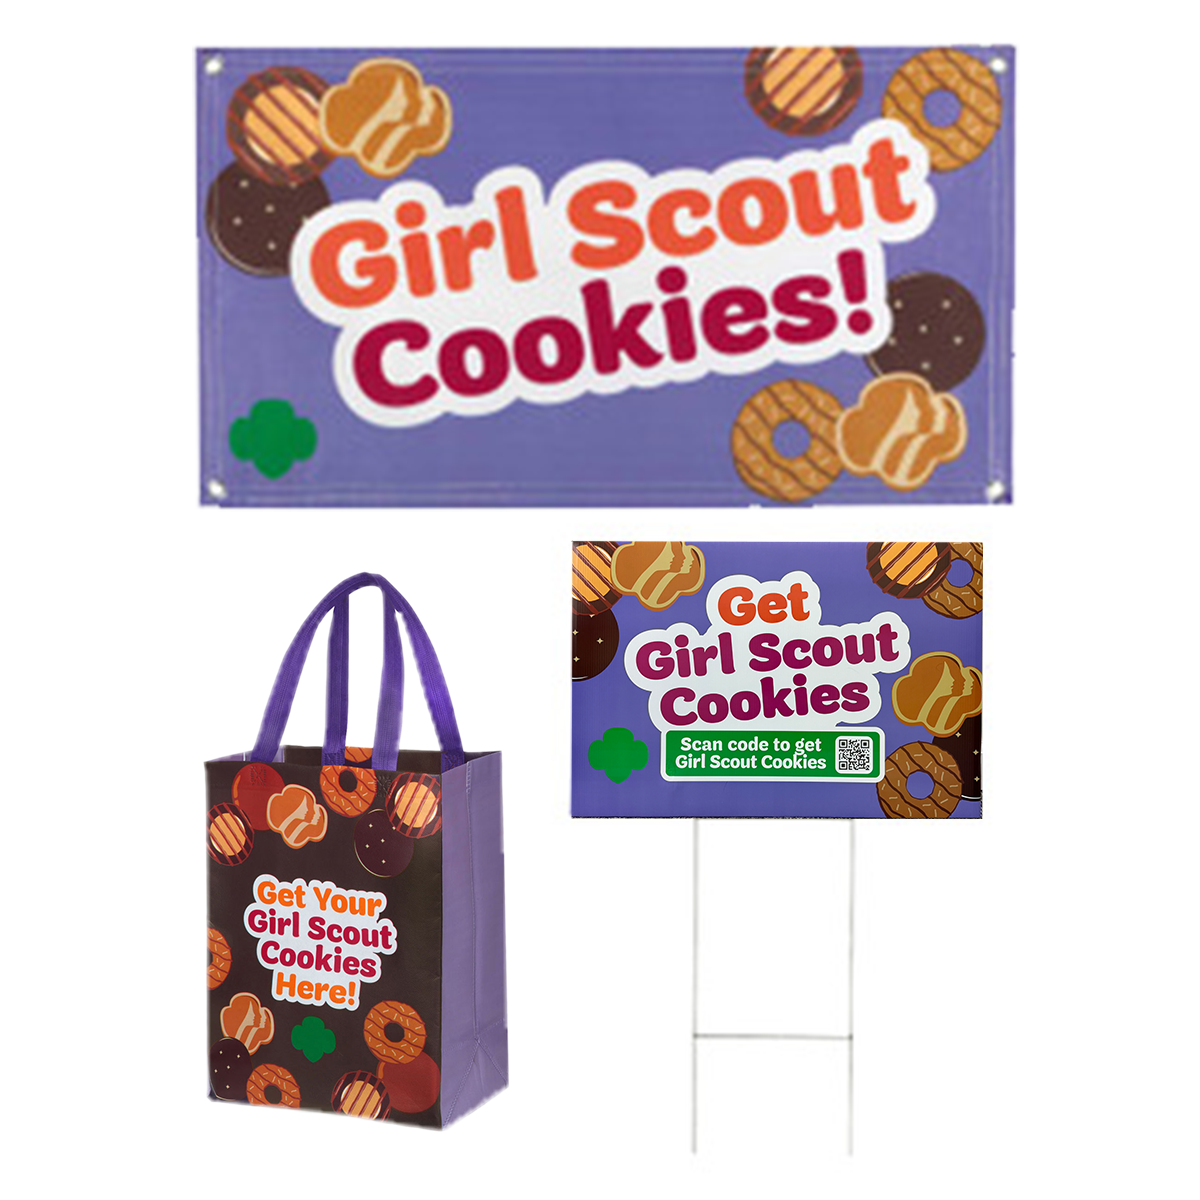 "Girl Scout Cookies" 